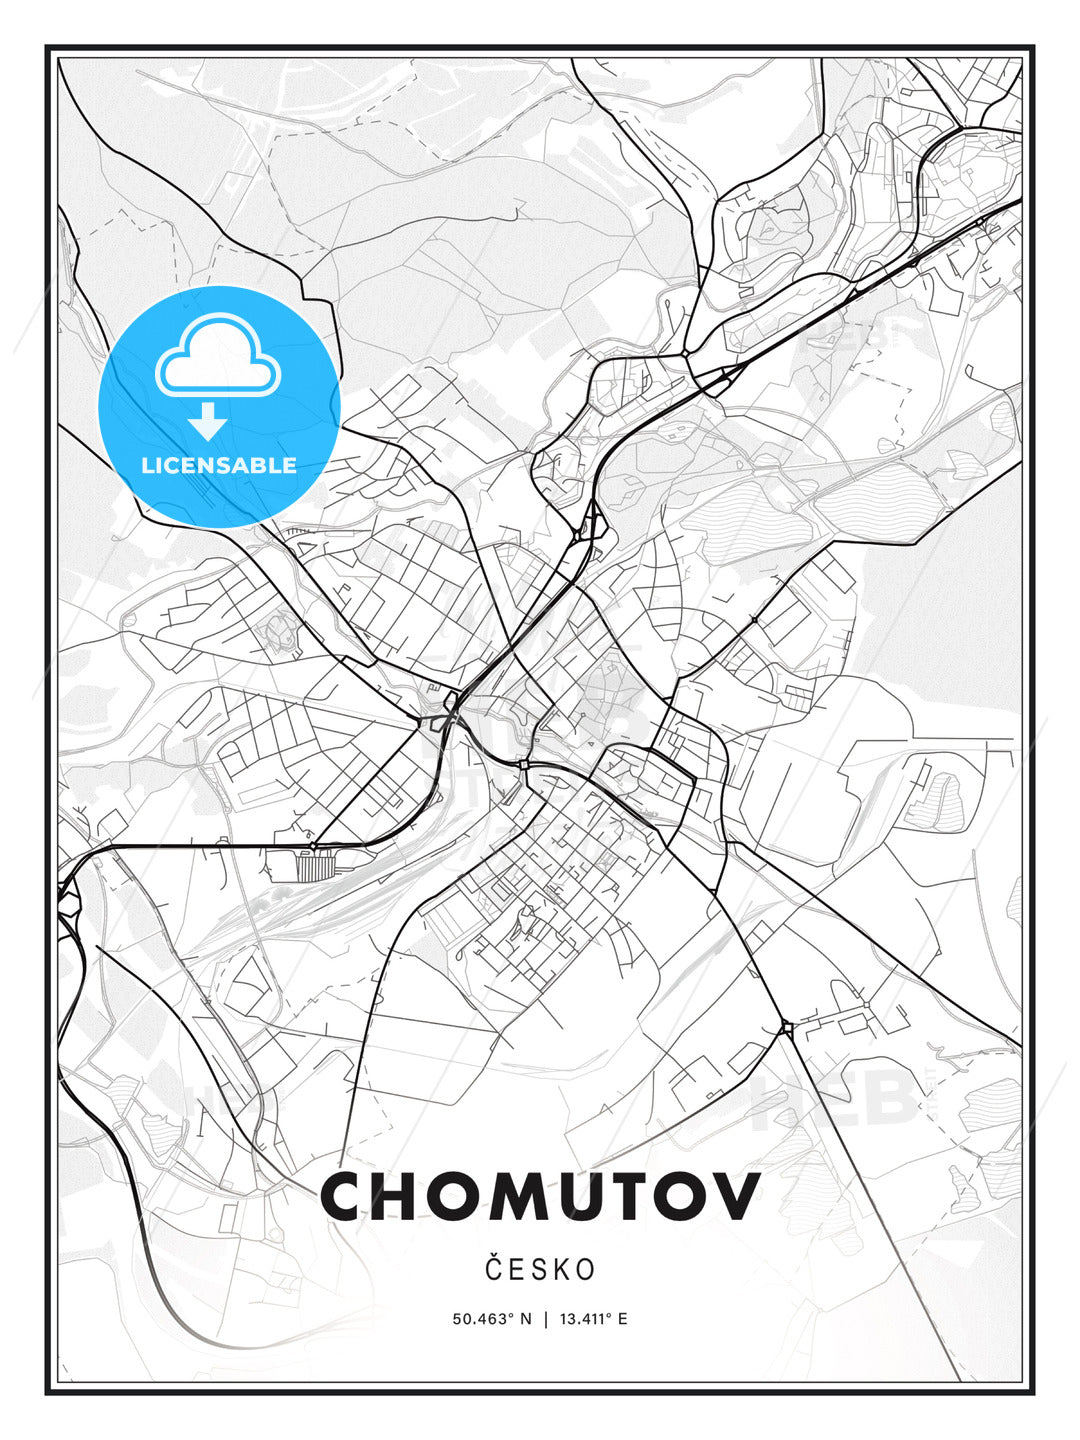 Chomutov, Czechia, Modern Print Template in Various Formats - HEBSTREITS Sketches